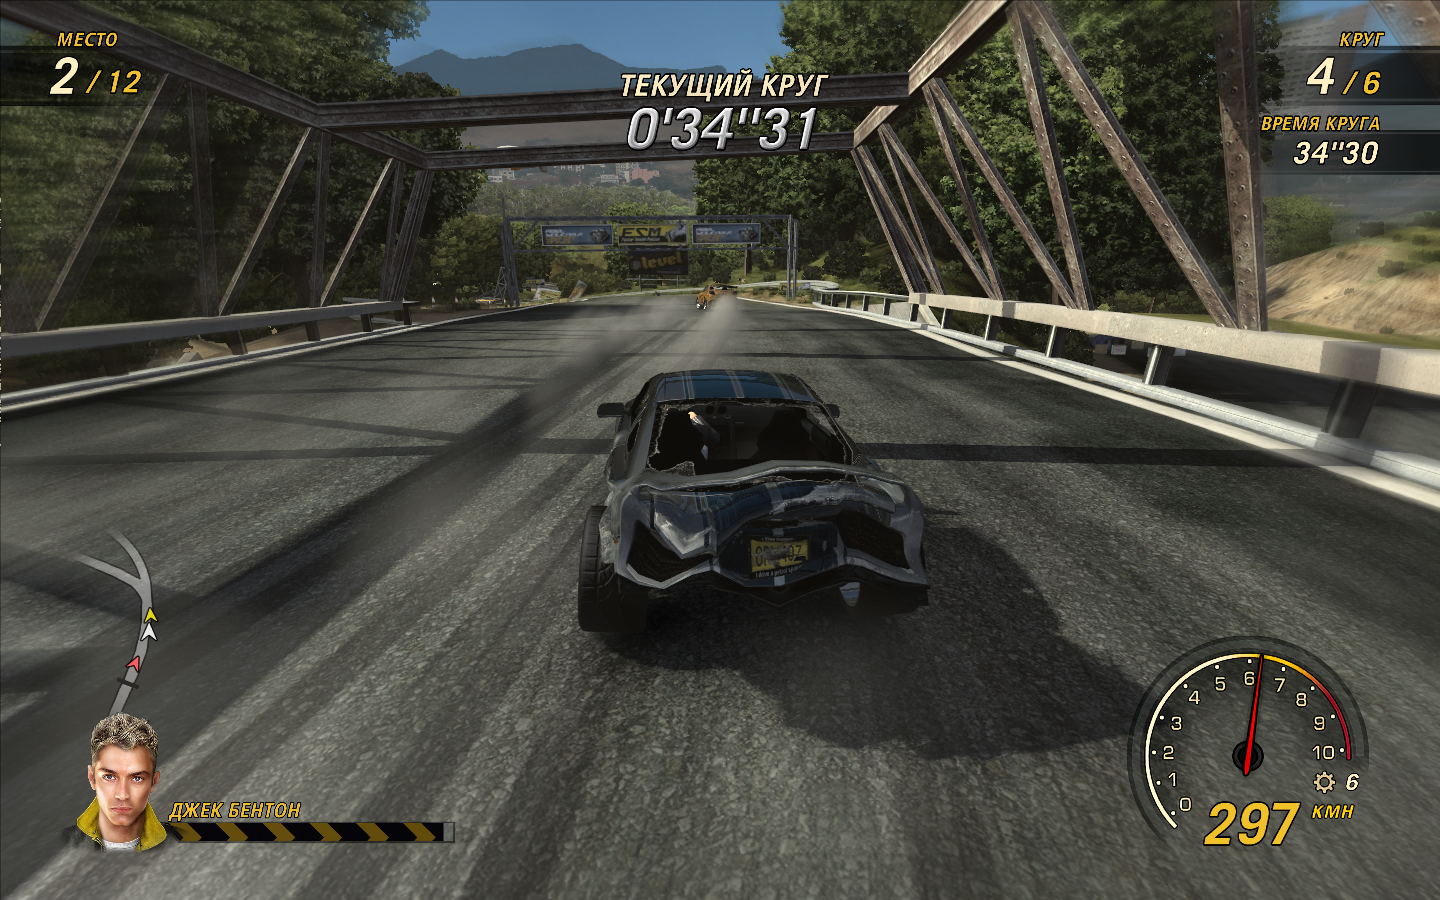 Modder showcases huge progress with Need for Speed Underground 2's